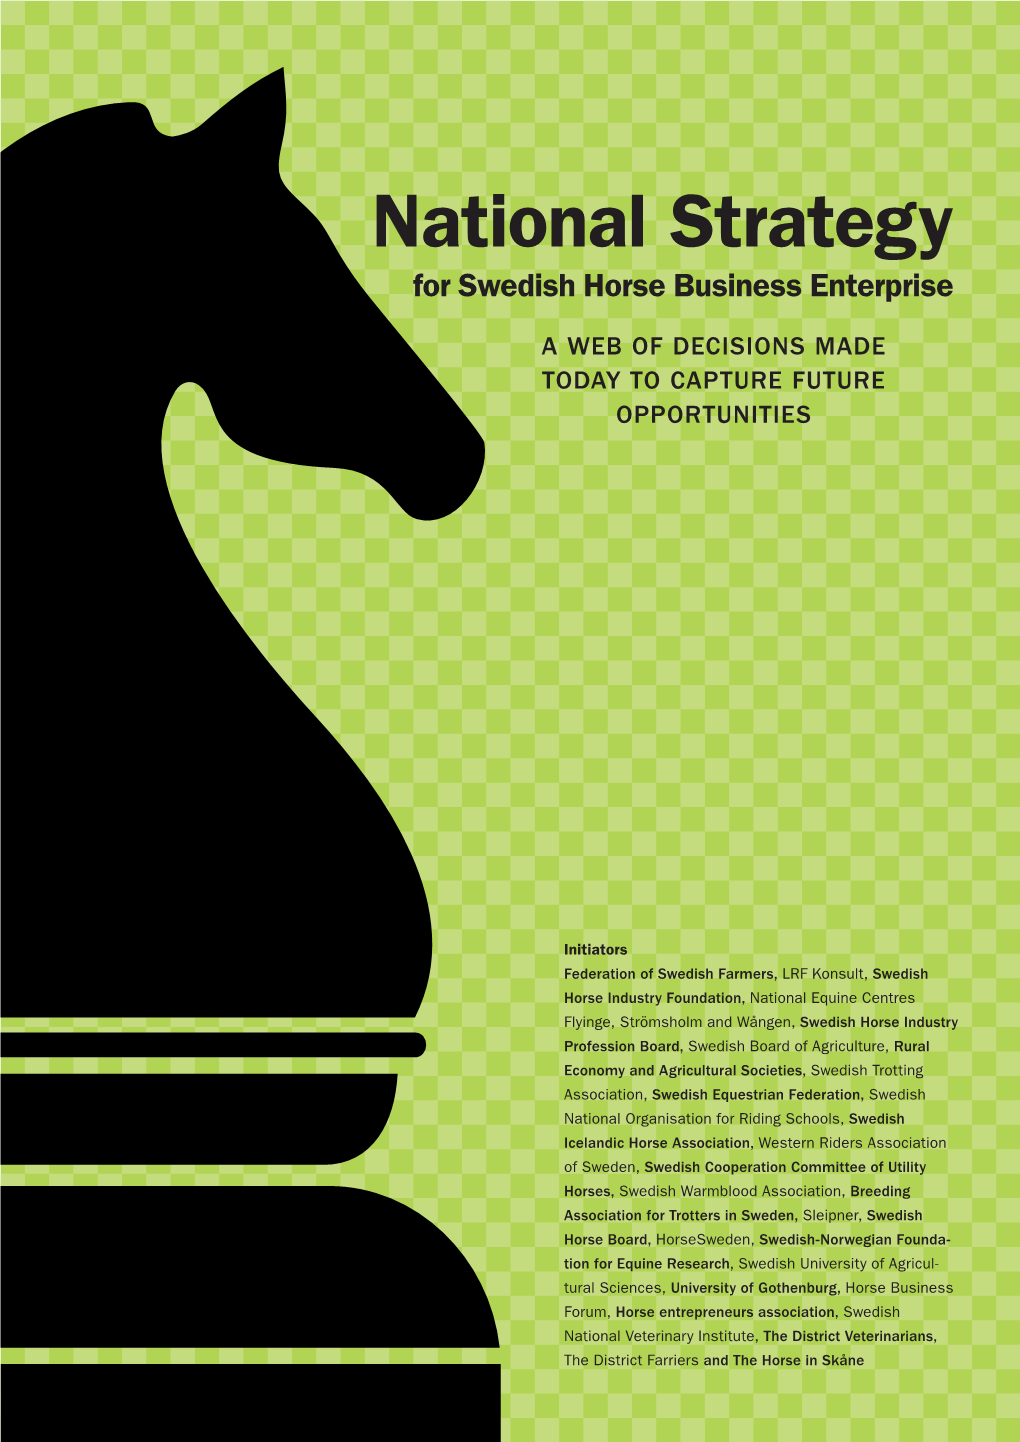 National Strategy for Swedish Horse Business Enterprise